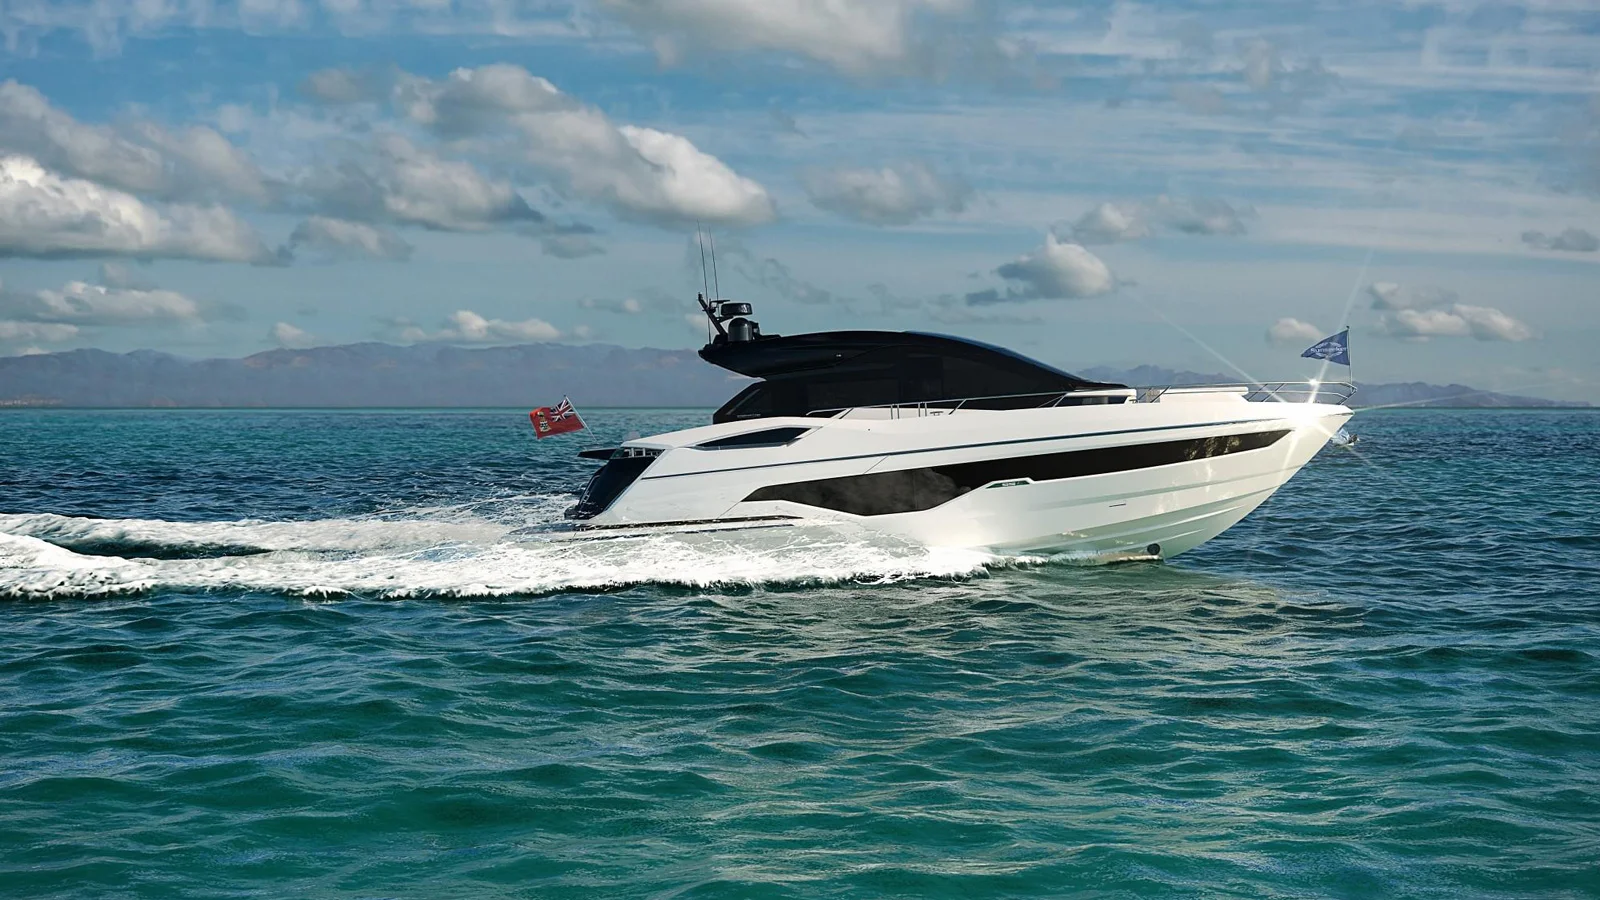 The Predator 55 reaches speeds of up to 35 knots